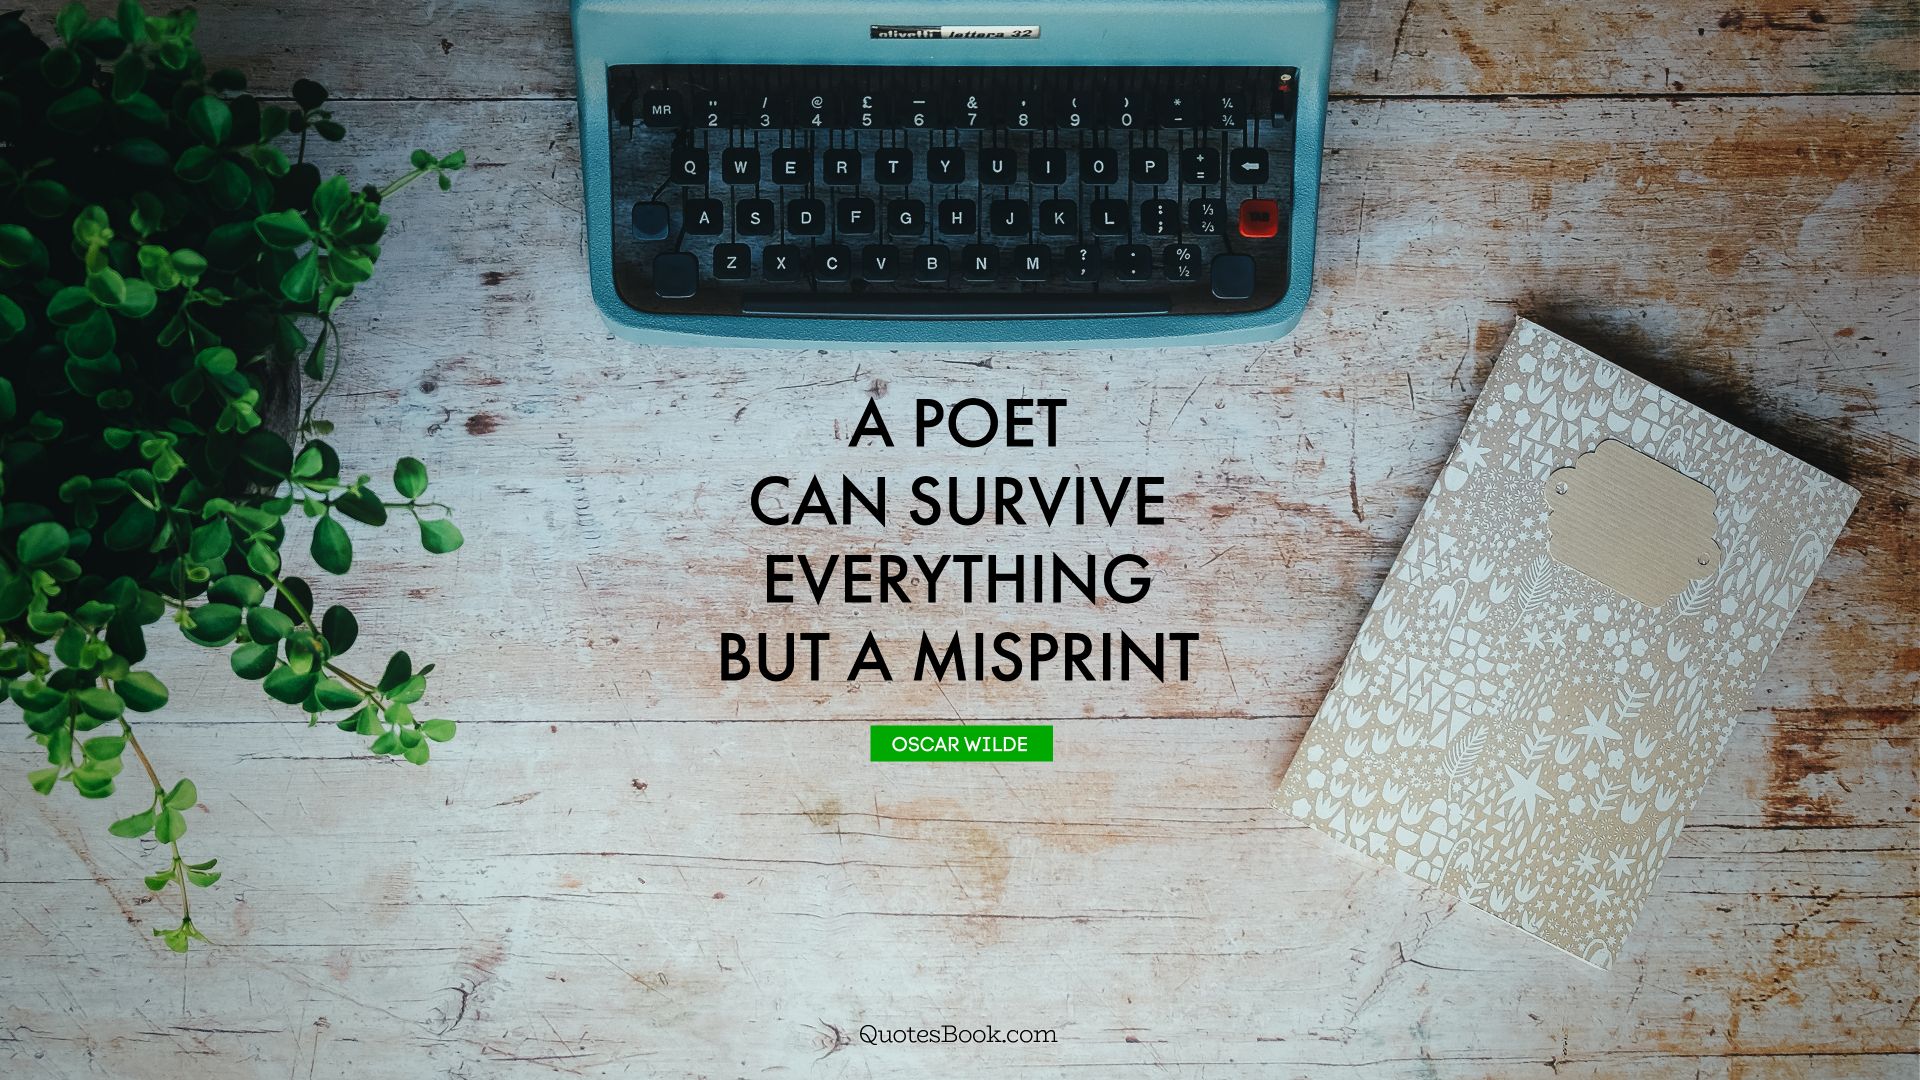 A poet can survive everything but a misprint. - Quote by Oscar Wilde